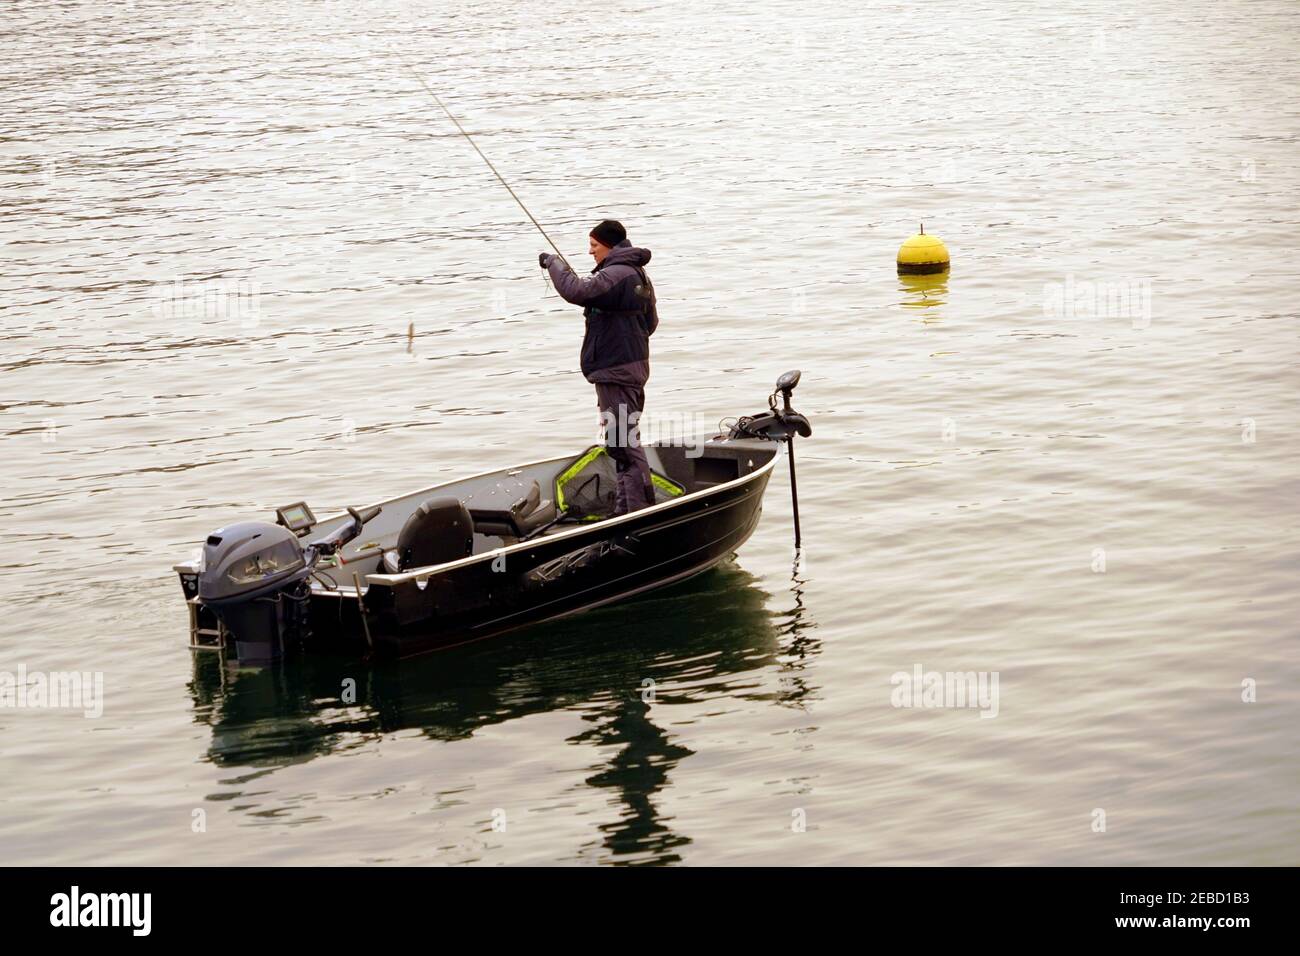 A hobby fisherman attaching bait on the hook on the lake Zurich in winter. He is standing in a boat and there is a yellow buoy on the water surface. Stock Photo